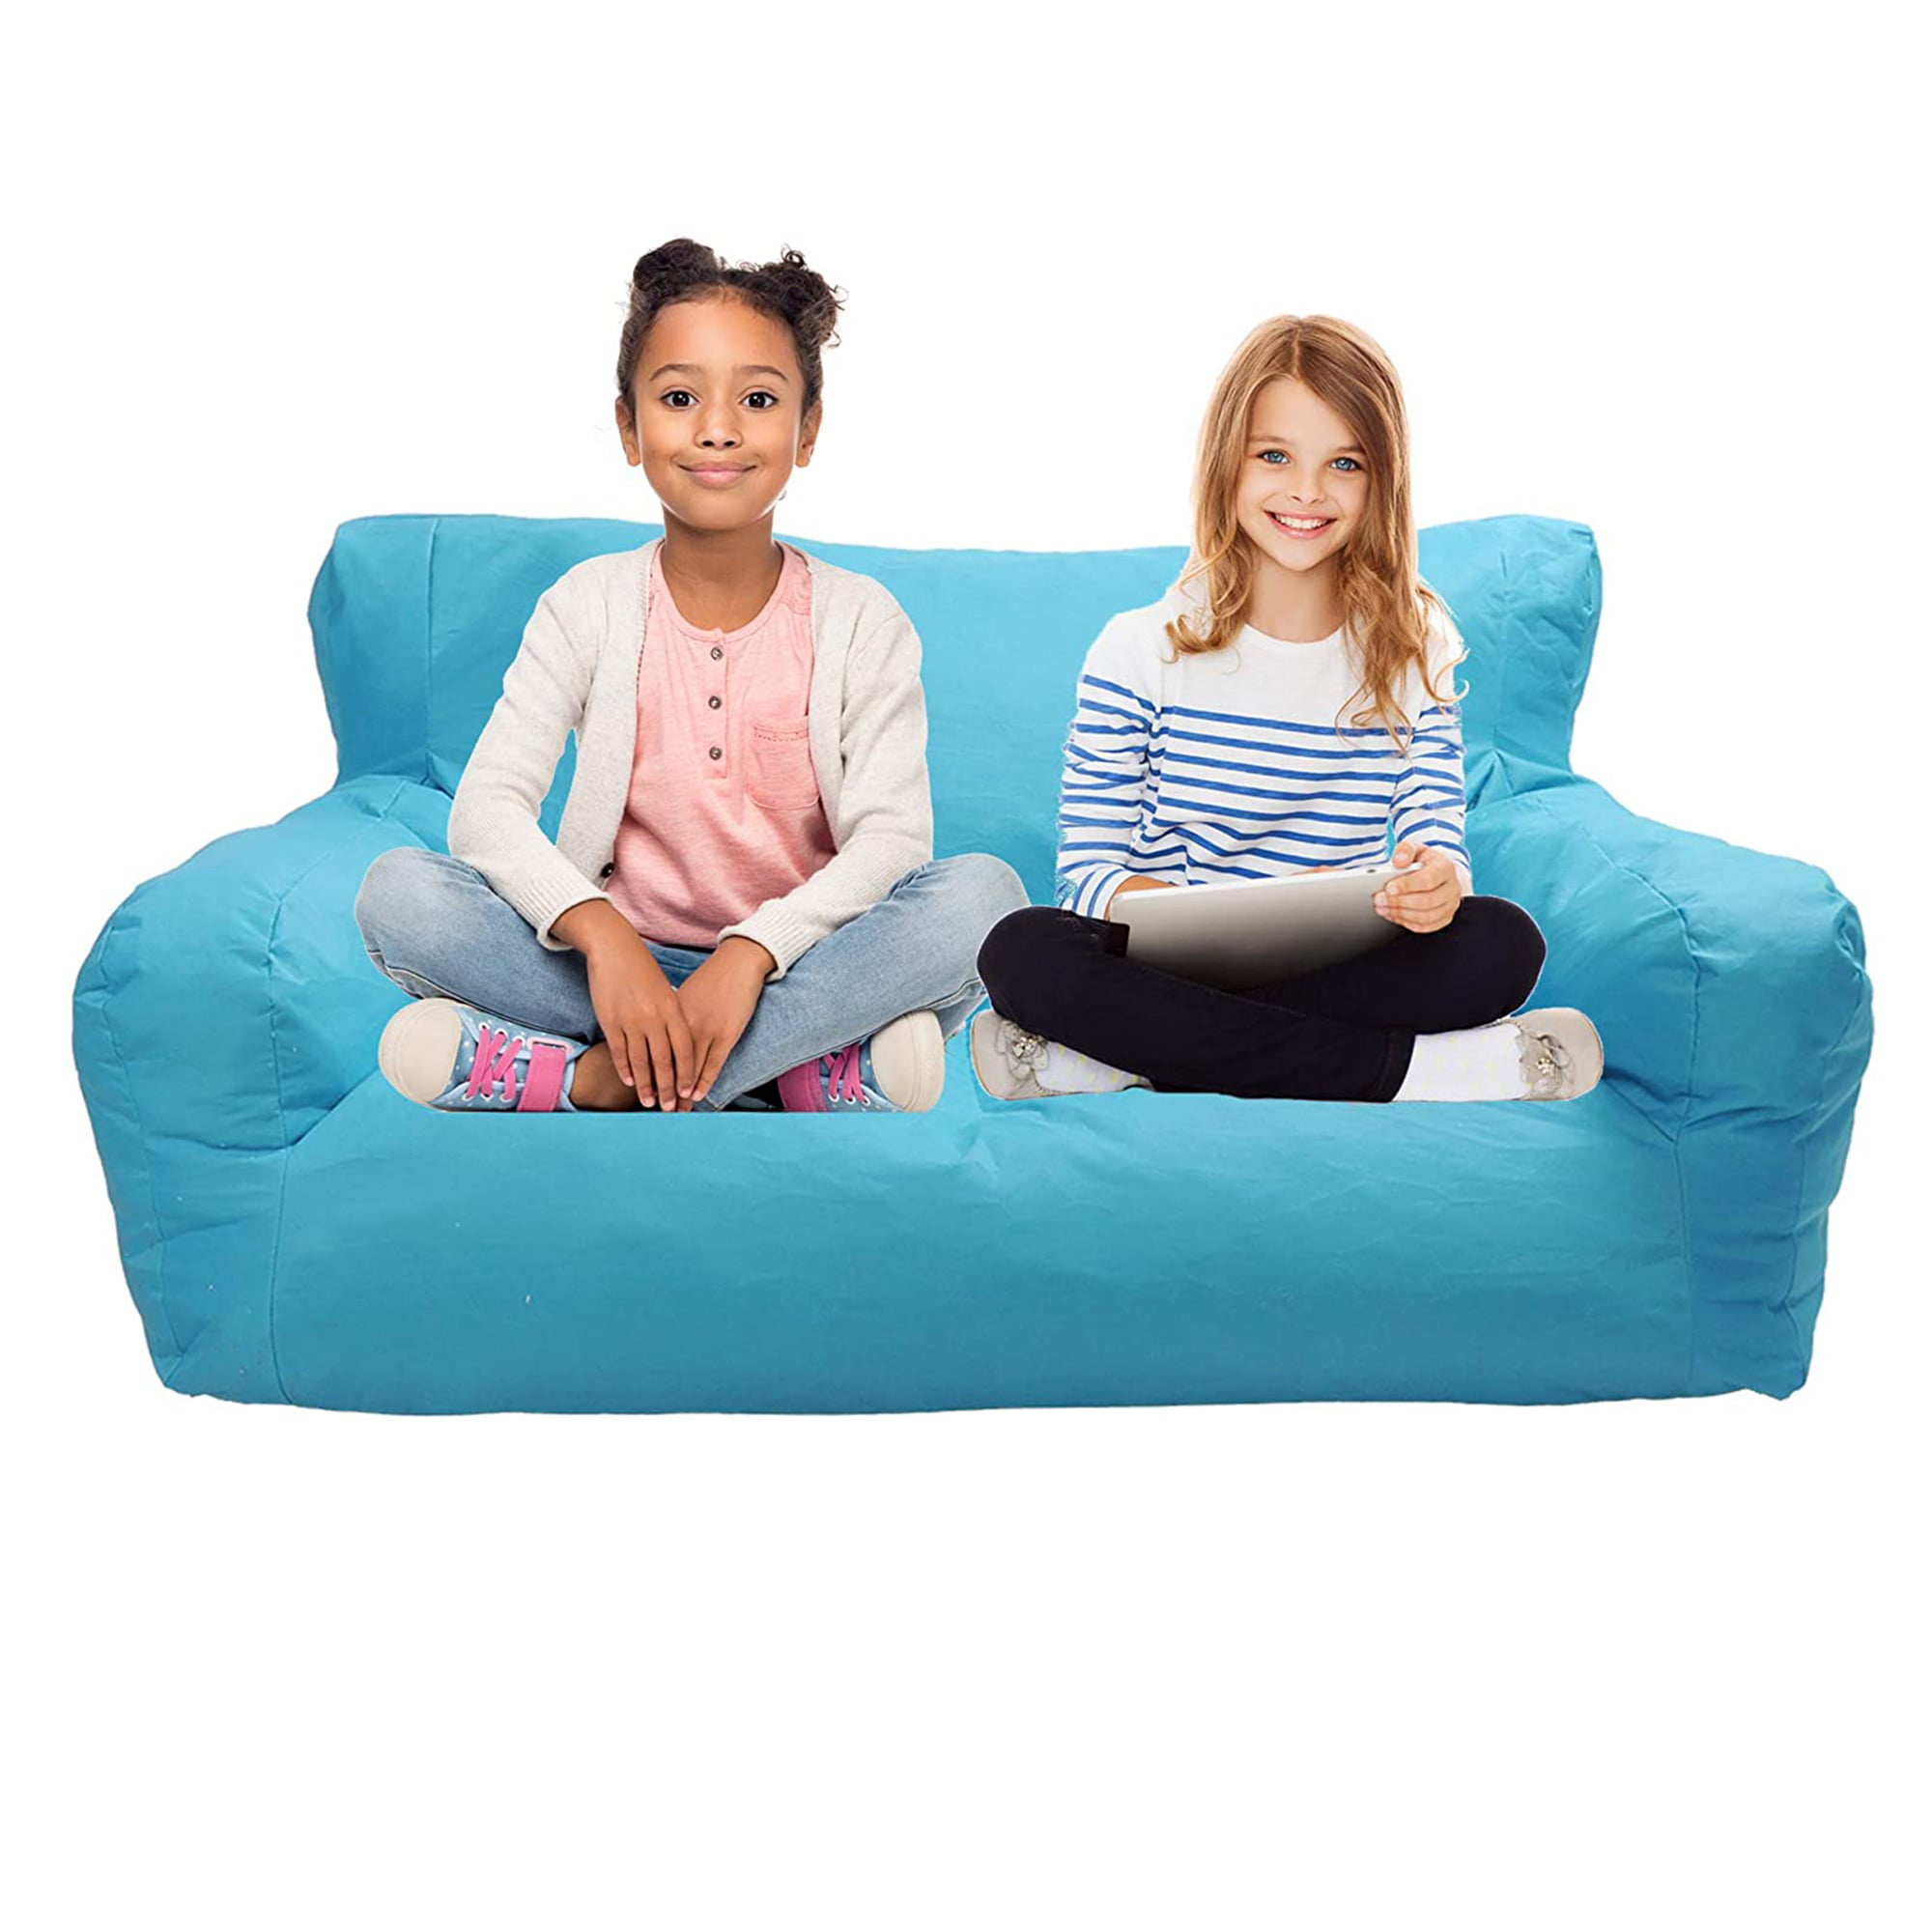 LONABR Bean Bag Chair Lounger Sofa Seat Self-Inflated Sponge Filling Kids  Adults